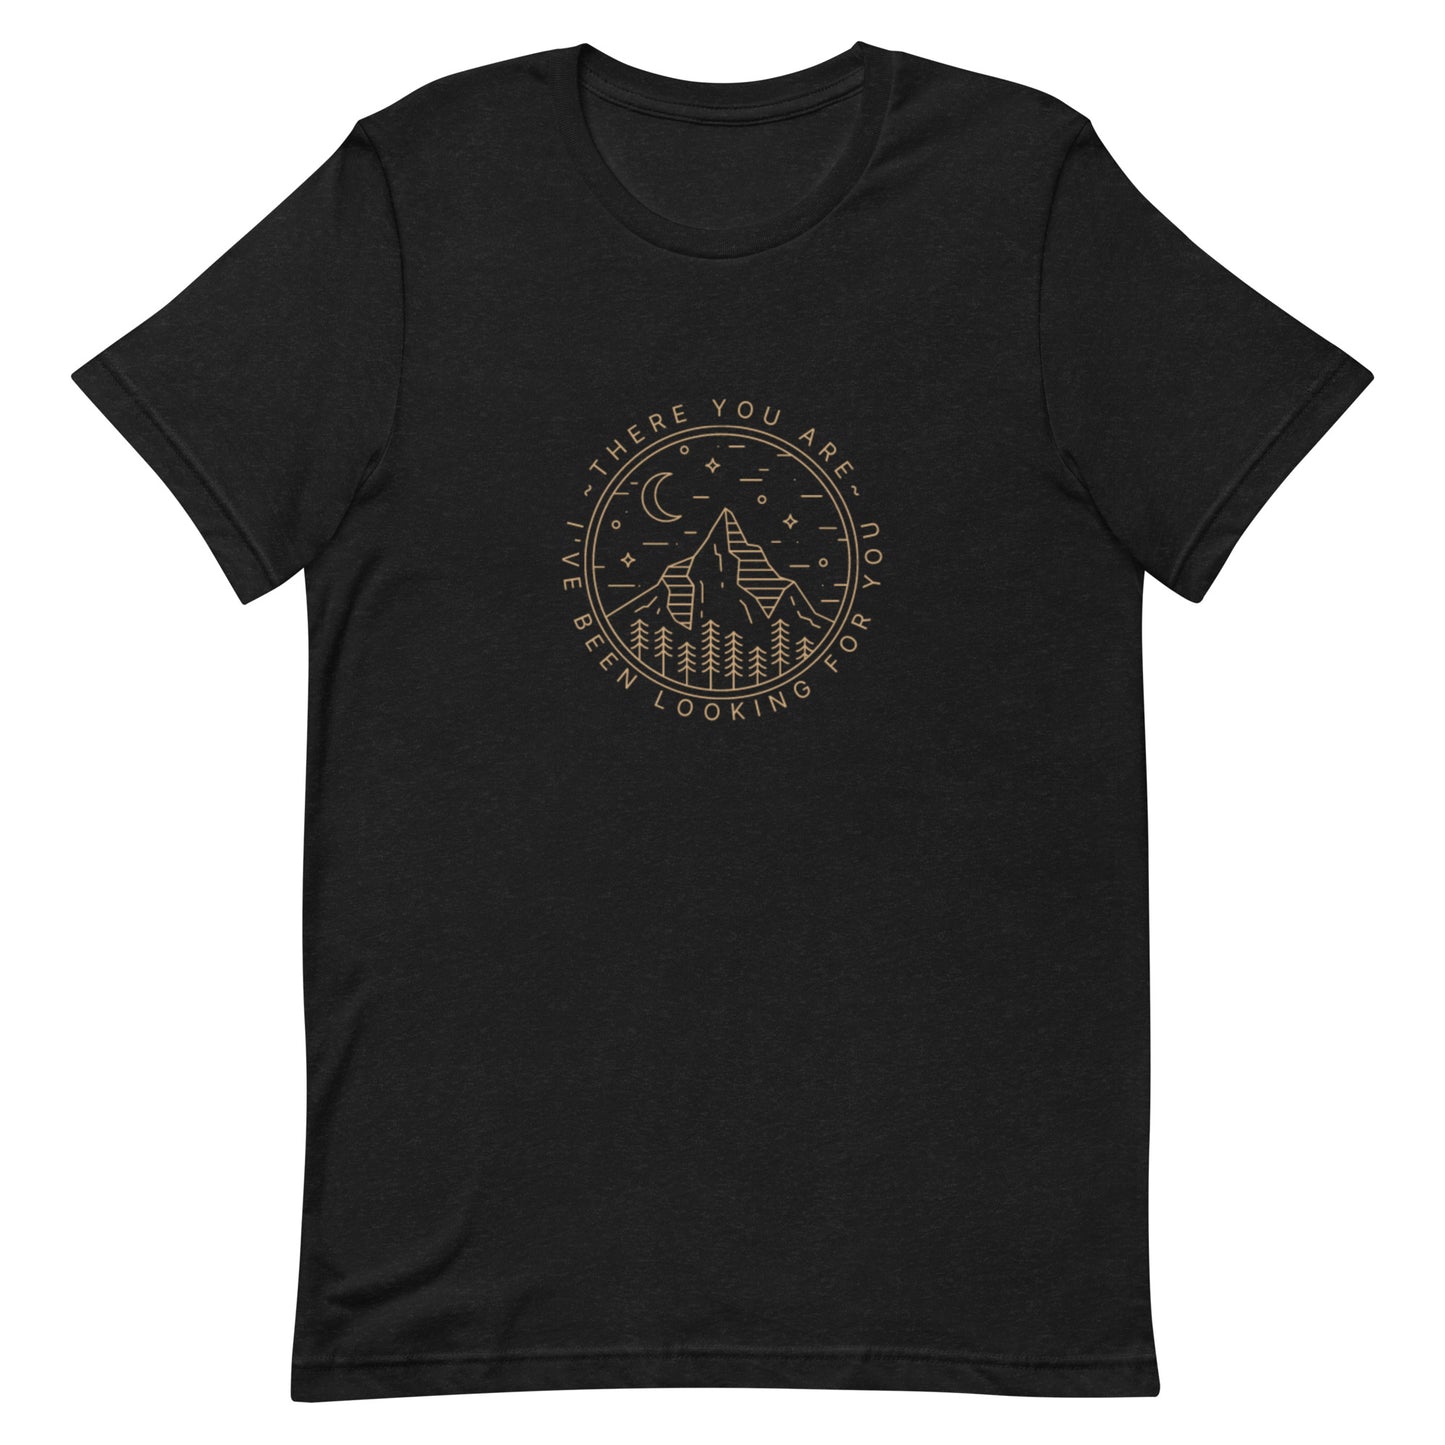 i've been looking for you acotar t-shirt